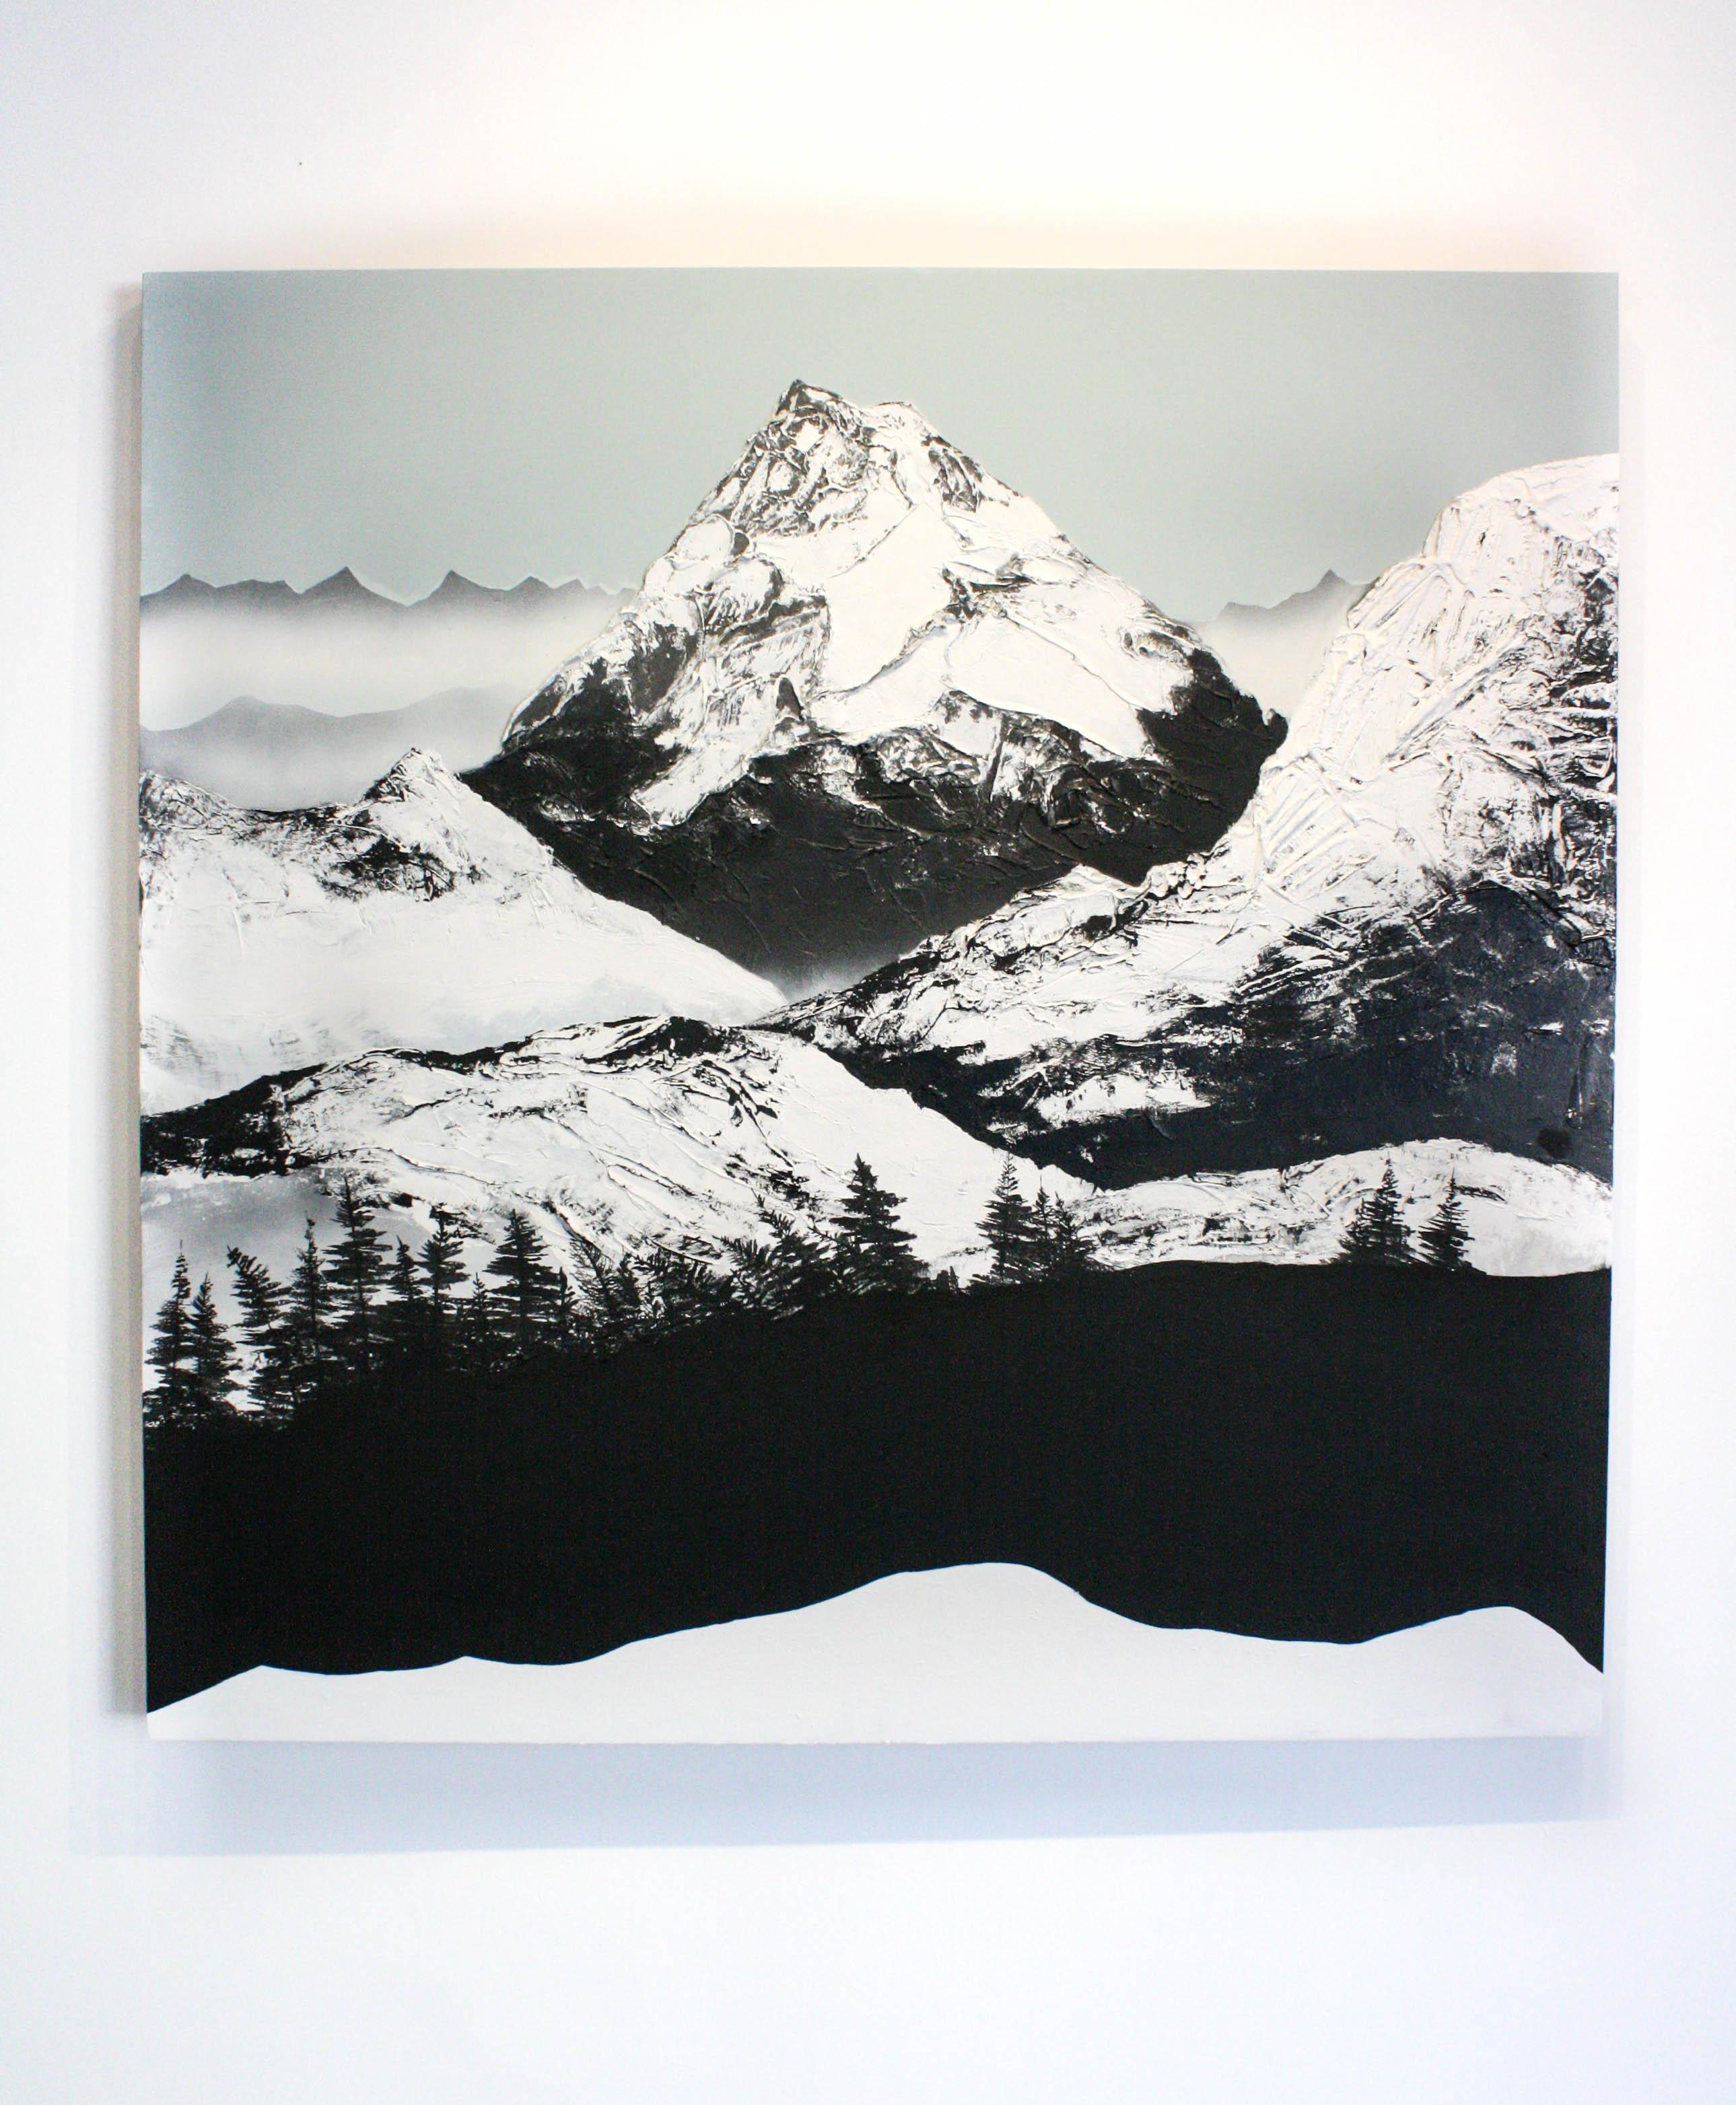 Dante's Peak- Figurative, Landscape, Abstract, Mixed Media, Wood Panel, Mountain - Painting by Daniel Holland